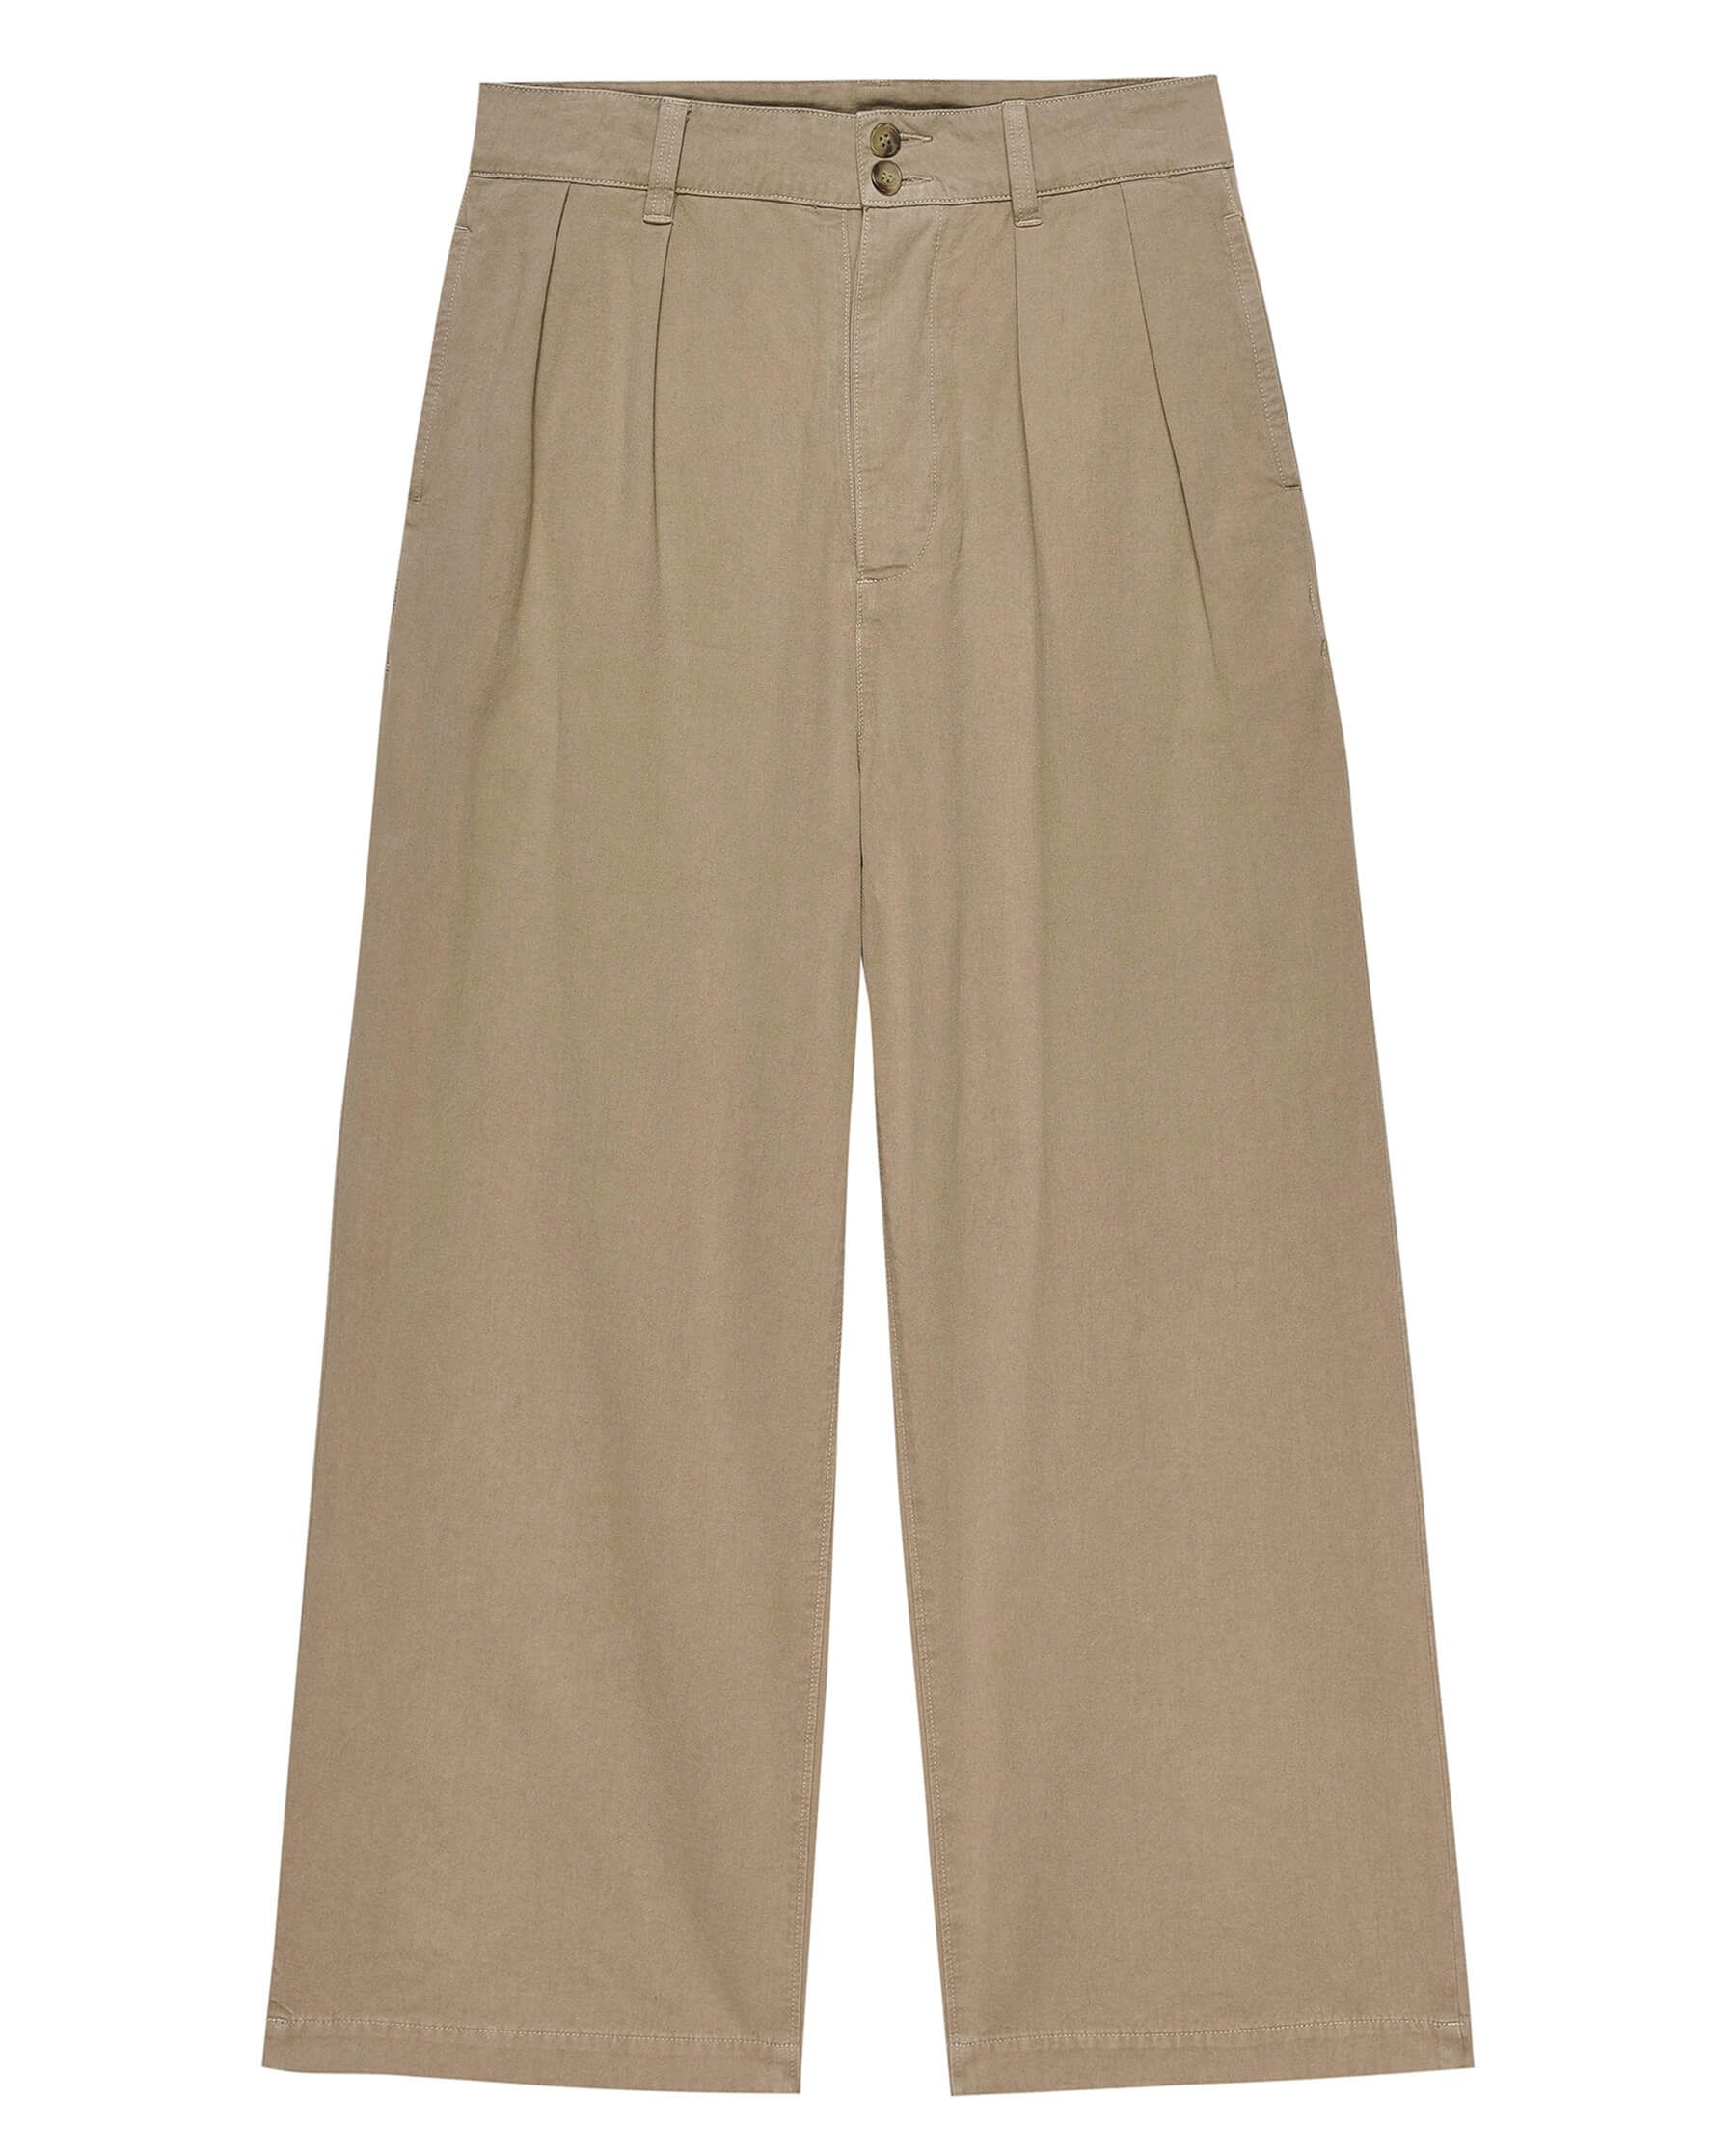 The Town Pant. | THE GREAT.